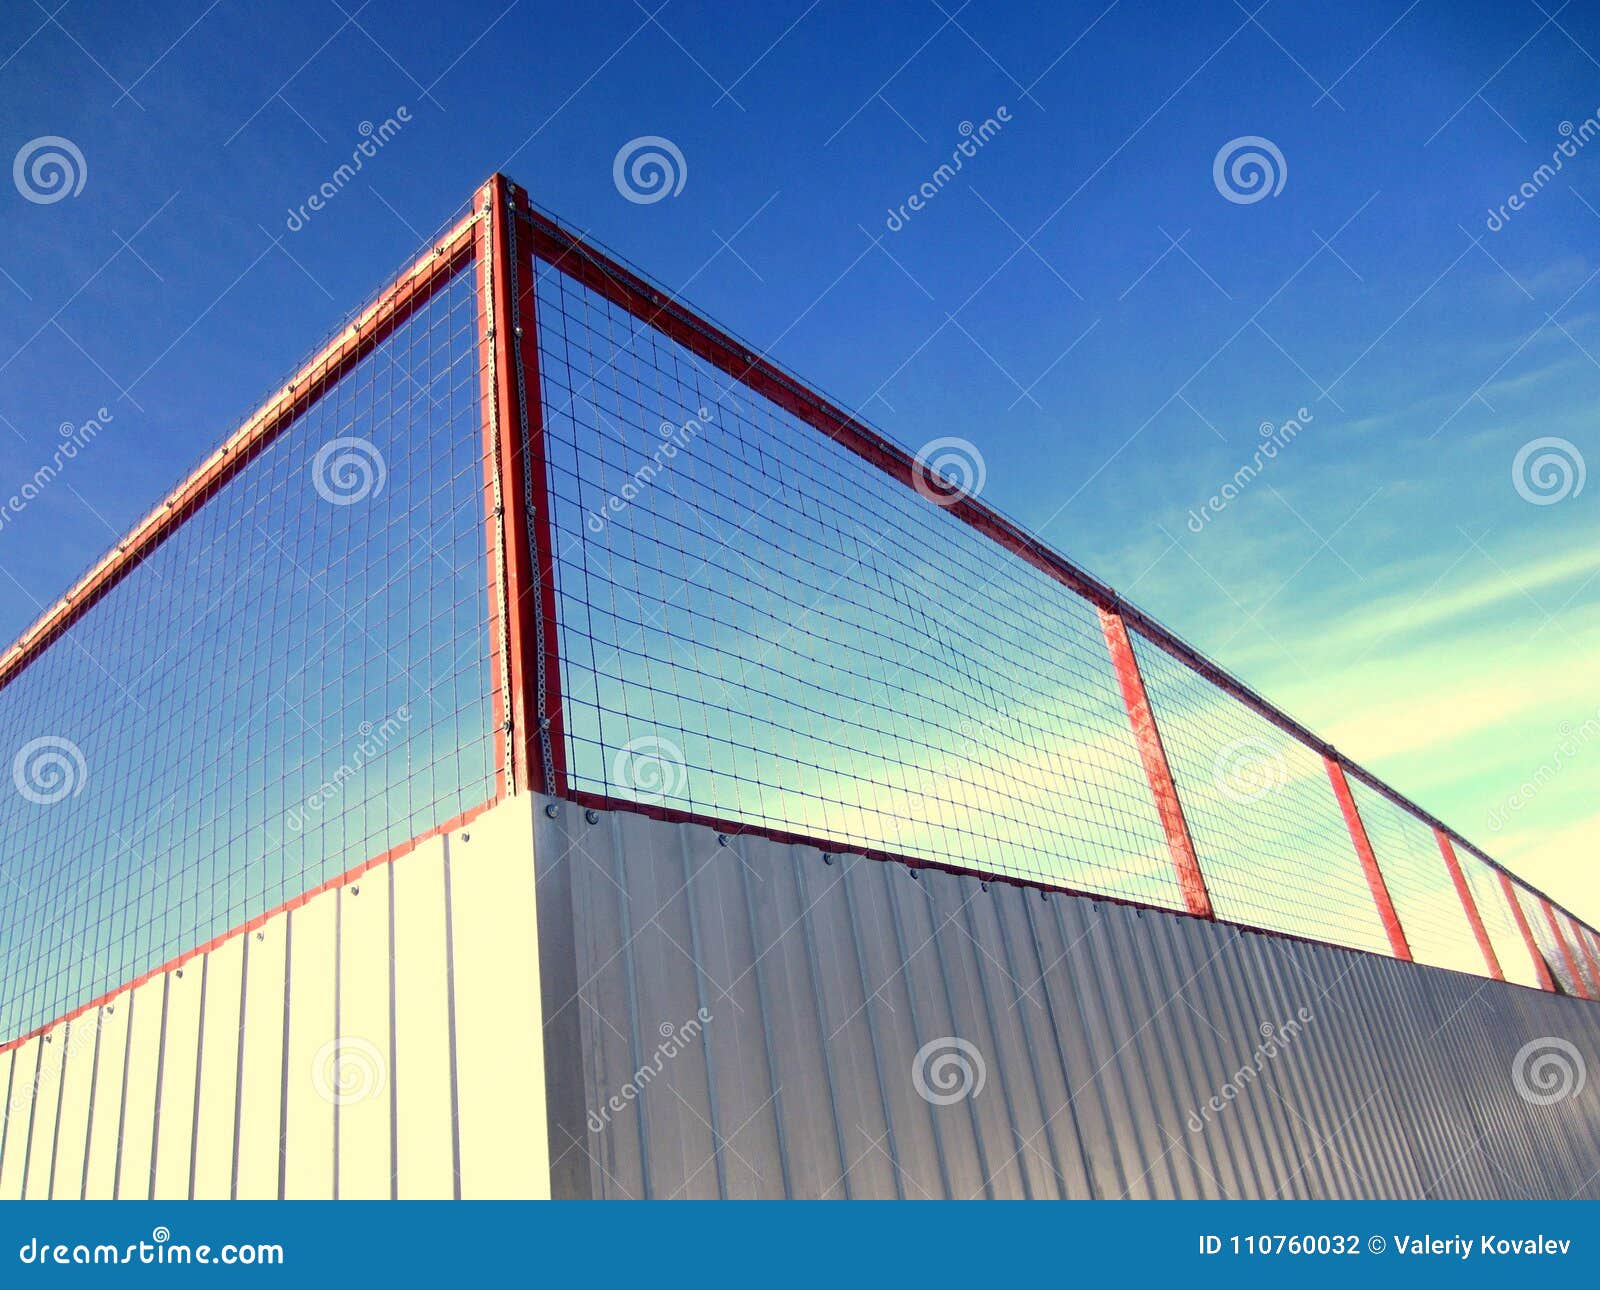 Metal Fence With Mesh. Protection Of Corrugated Sheet And Metal Mesh ...
